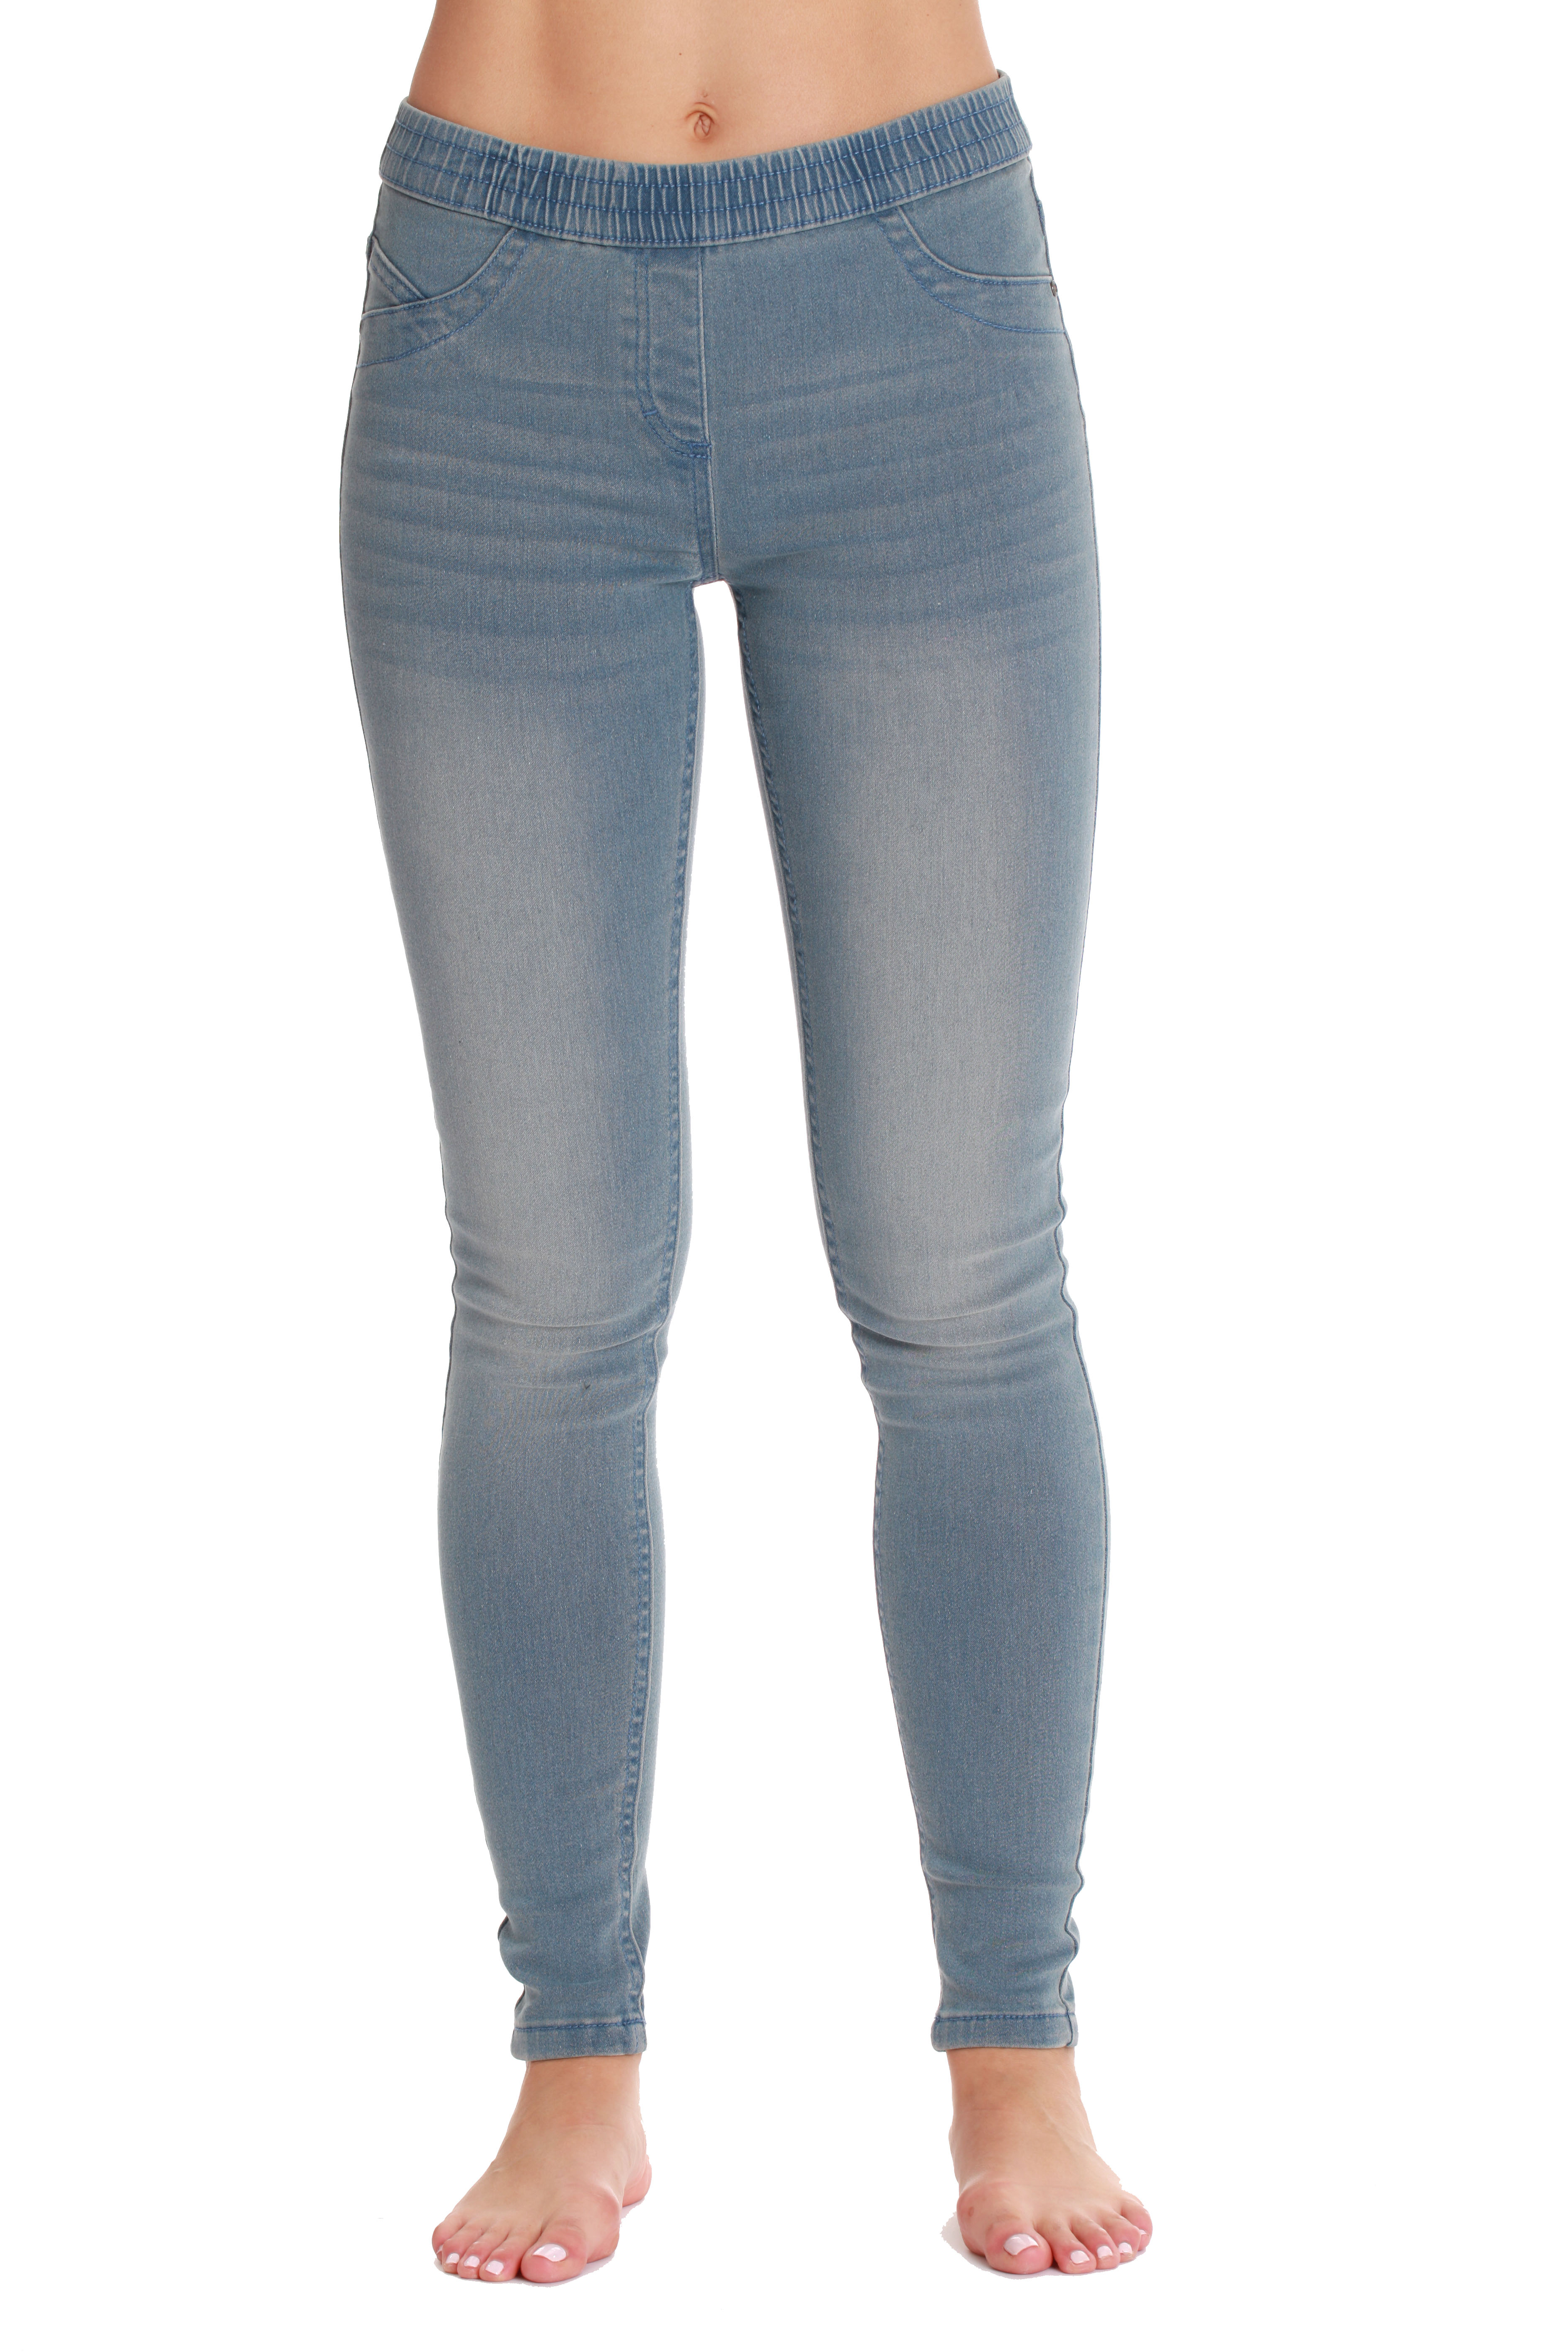 Just Love Women's Denim Jeggings with Pockets - Comfortable Stretch Jeans Leggings (Light Blue Denim, Small) - image 1 of 2